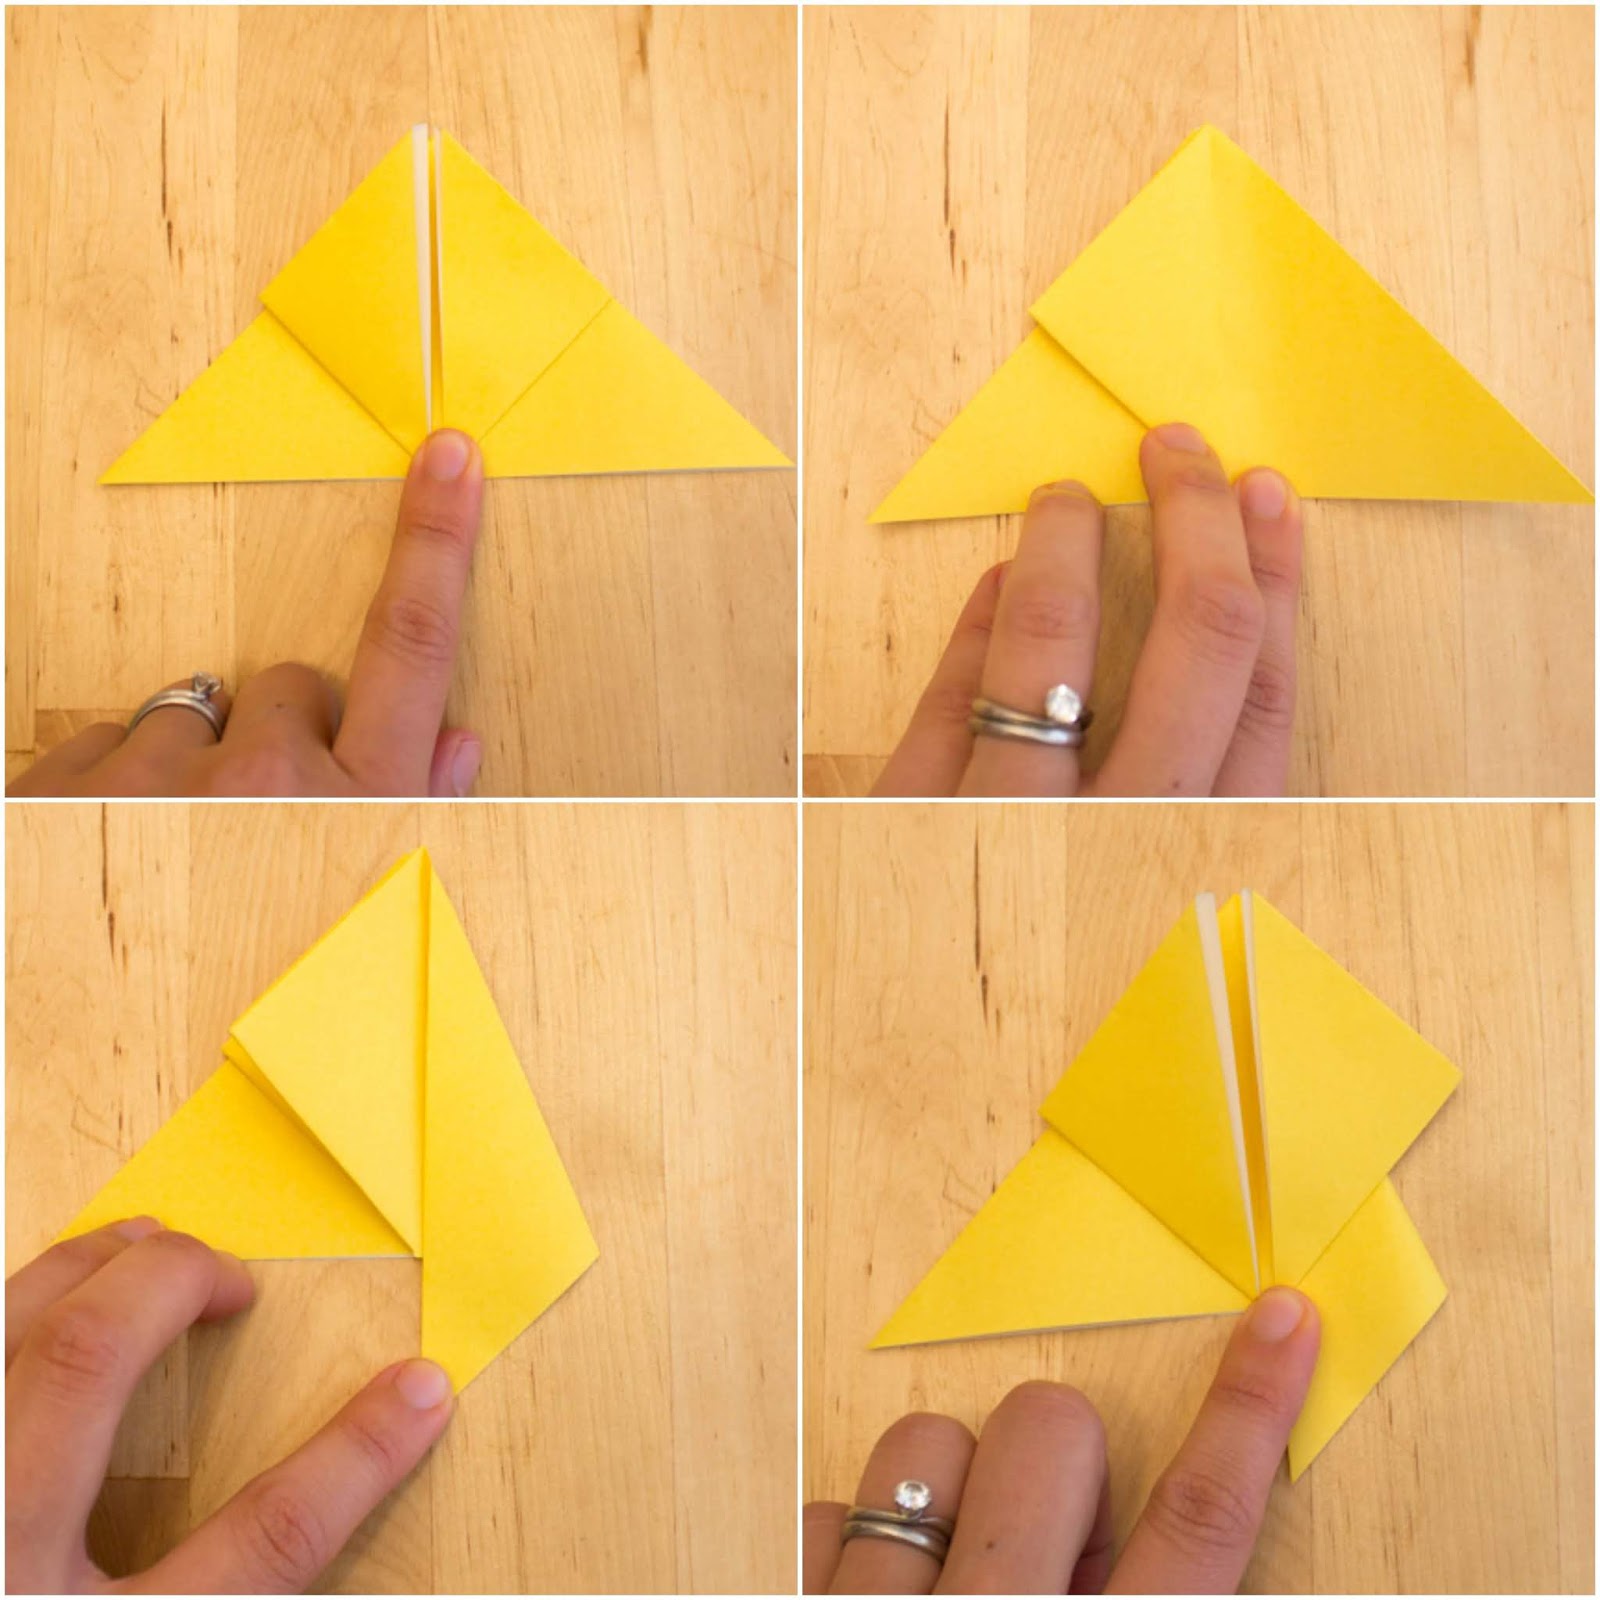 8 Easy Origami for Kids Books  Book origami, Origami easy, Easy origami  for kids